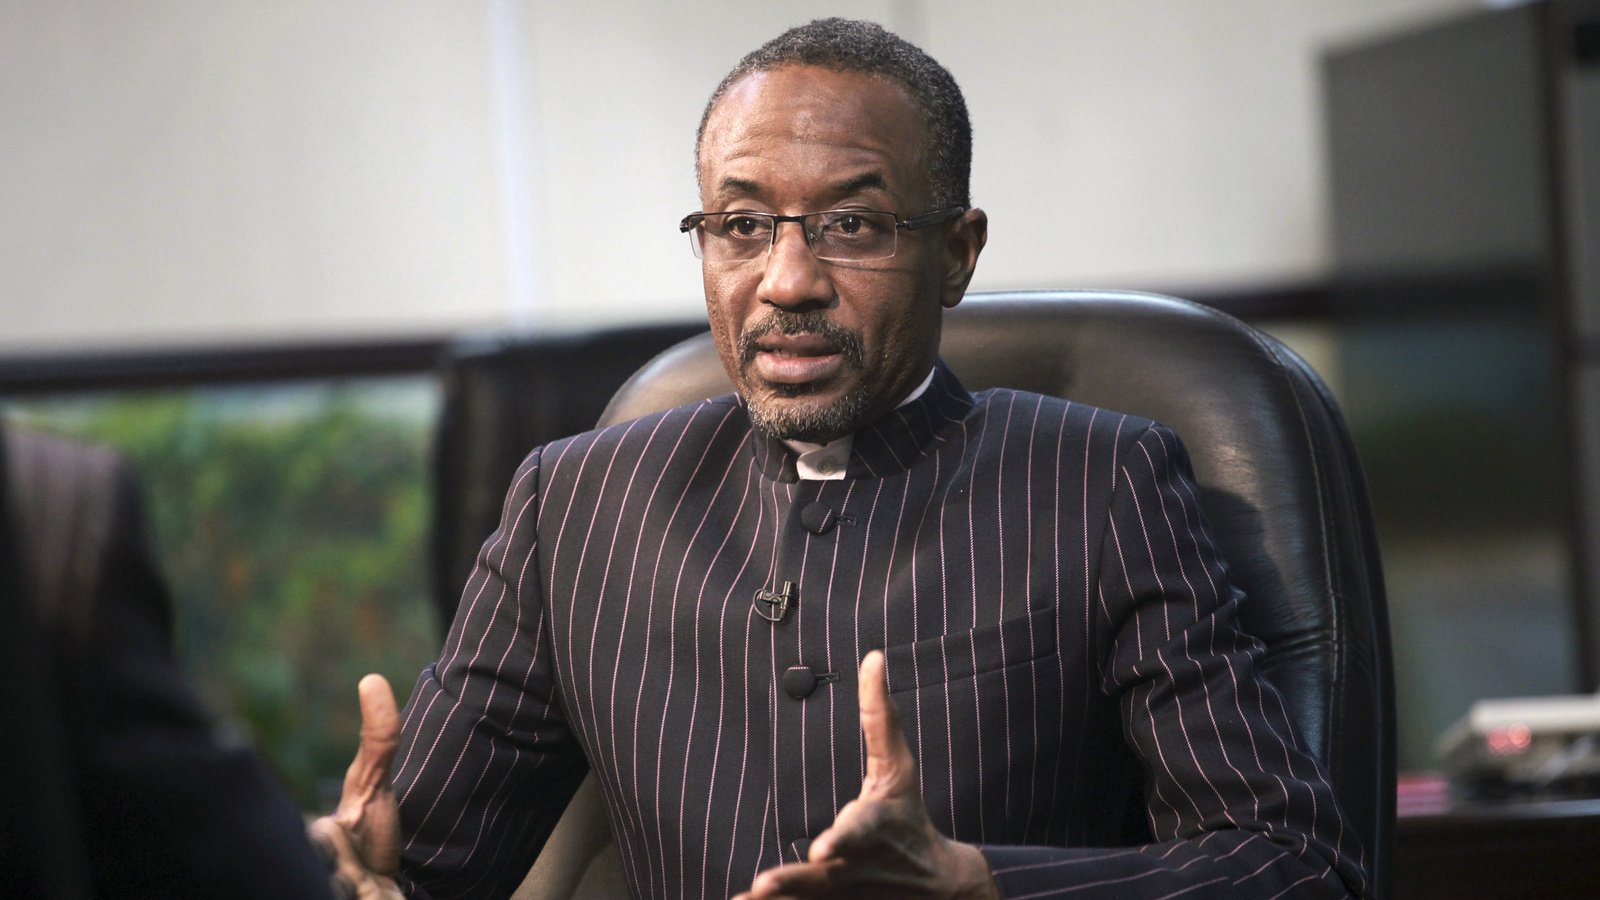 We have been digging ourselves into deeper hole, Sanusi decries state of economy